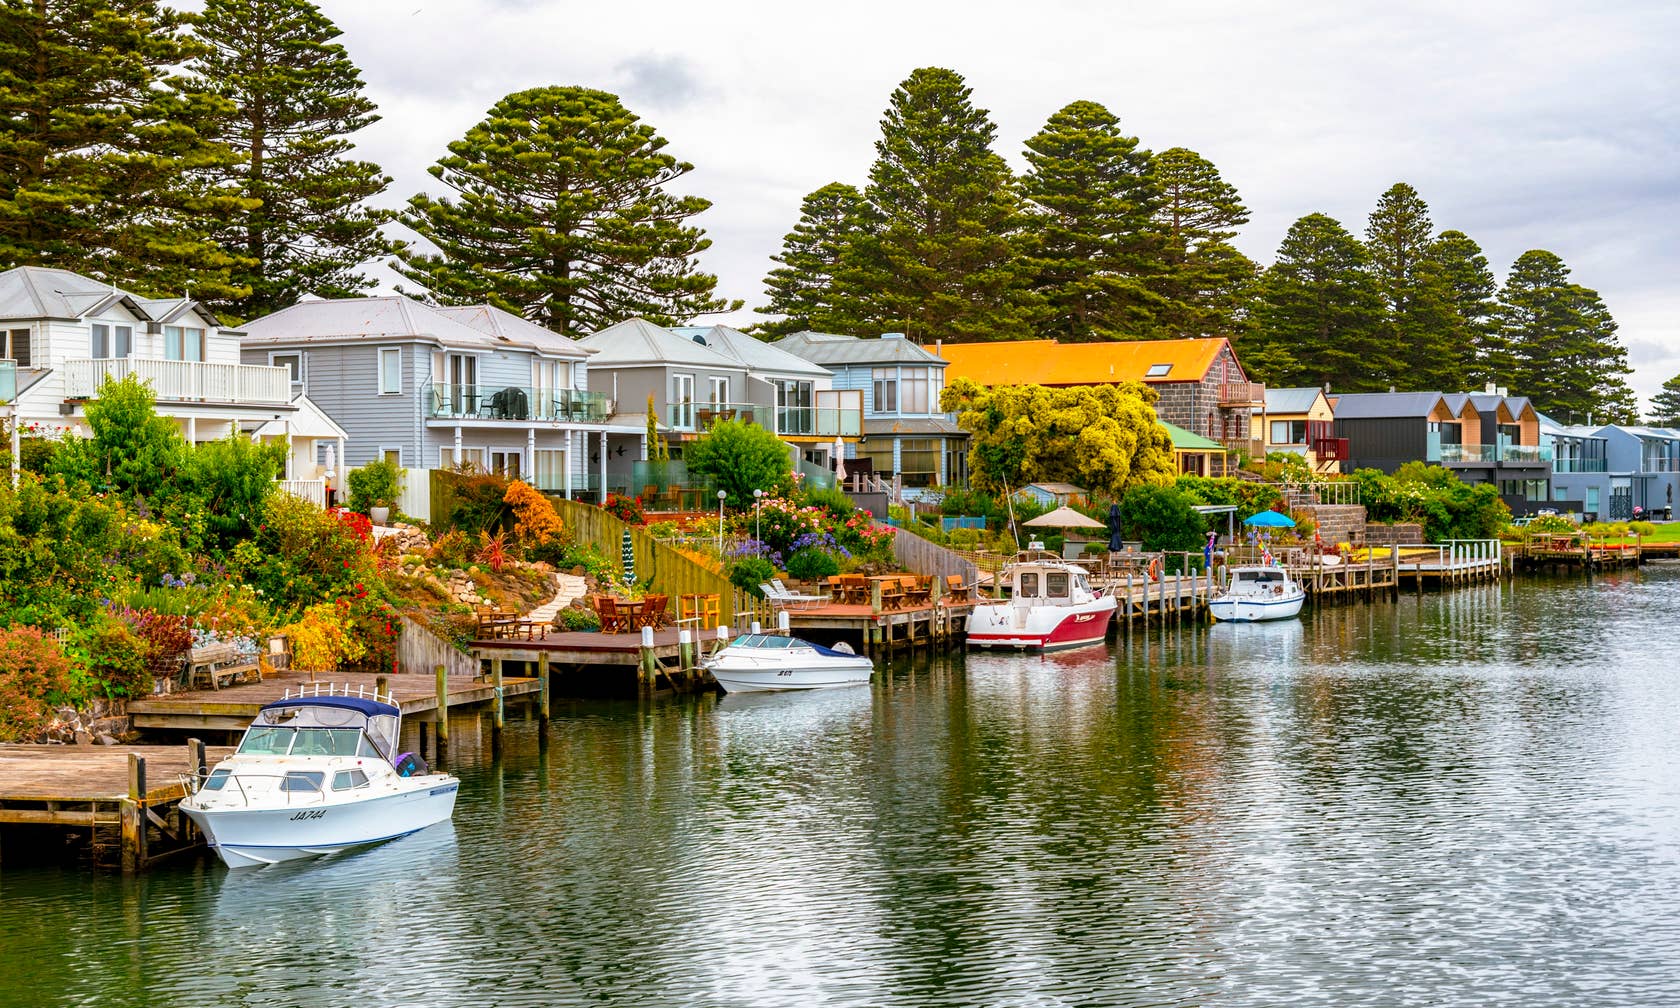 Holiday rentals in Port Fairy